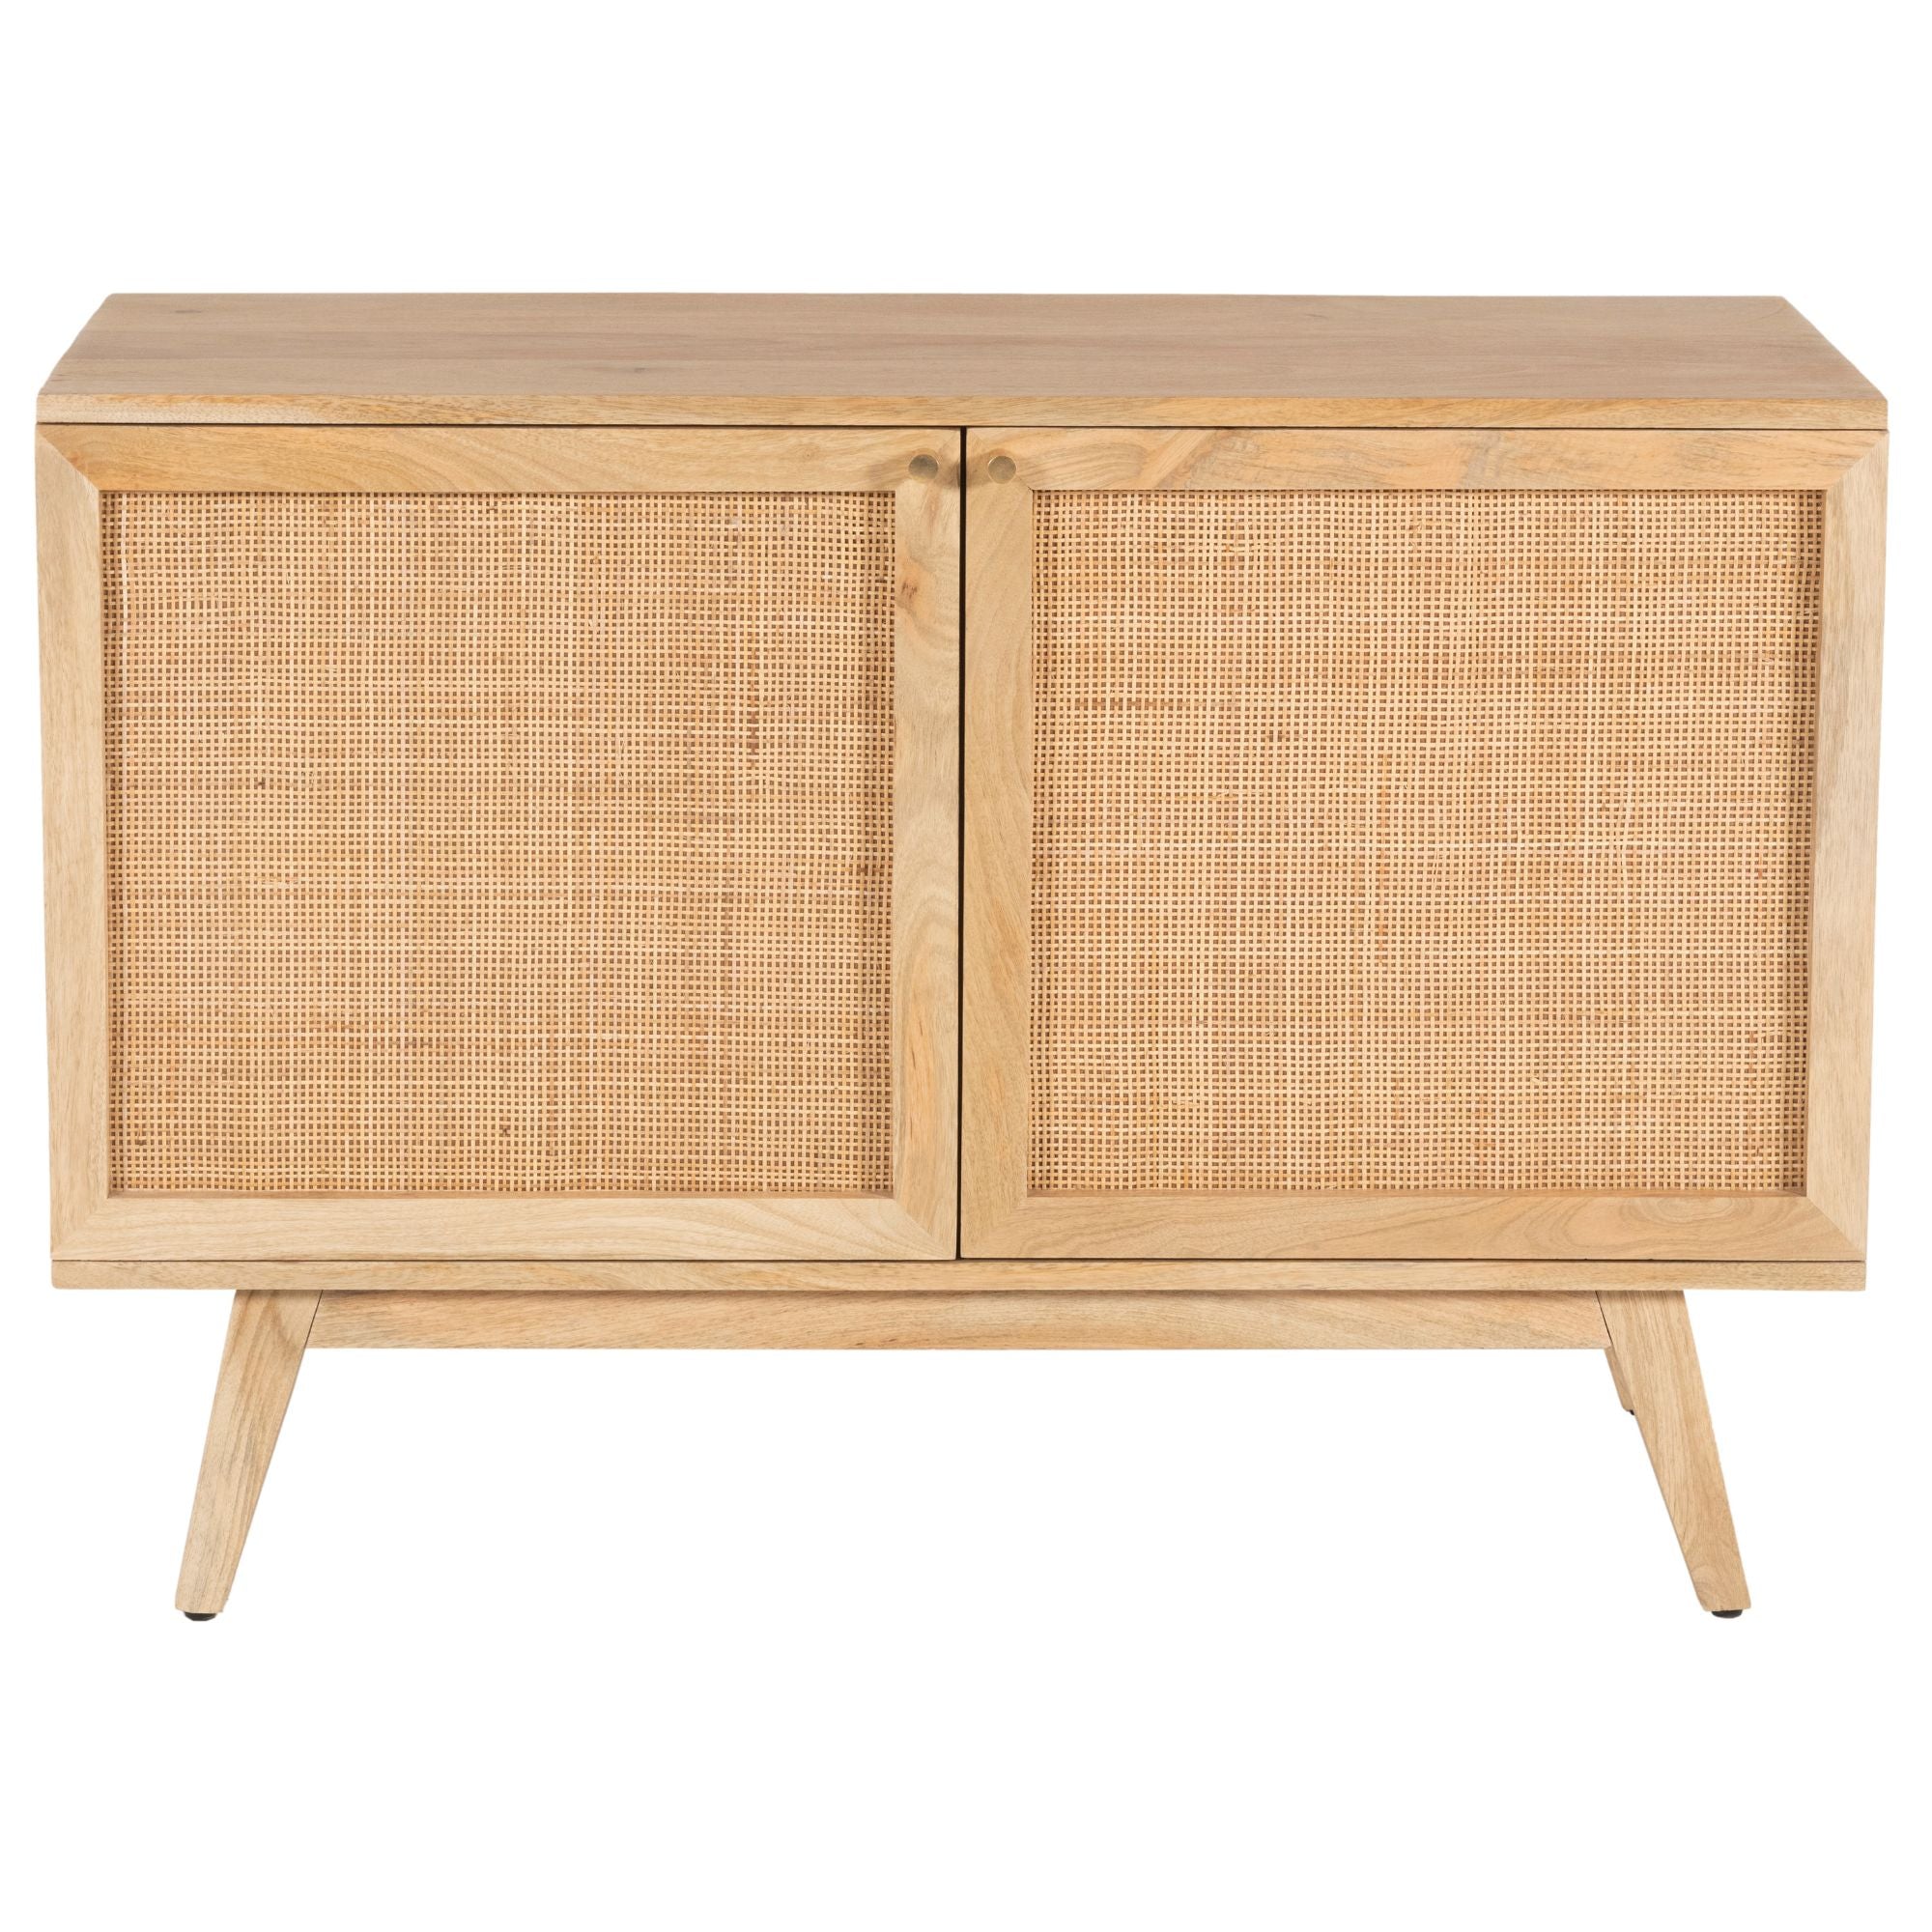 Olearia  Buffet Table 100cm 2 Door Solid Mango Wood Storage Cabinet Natural